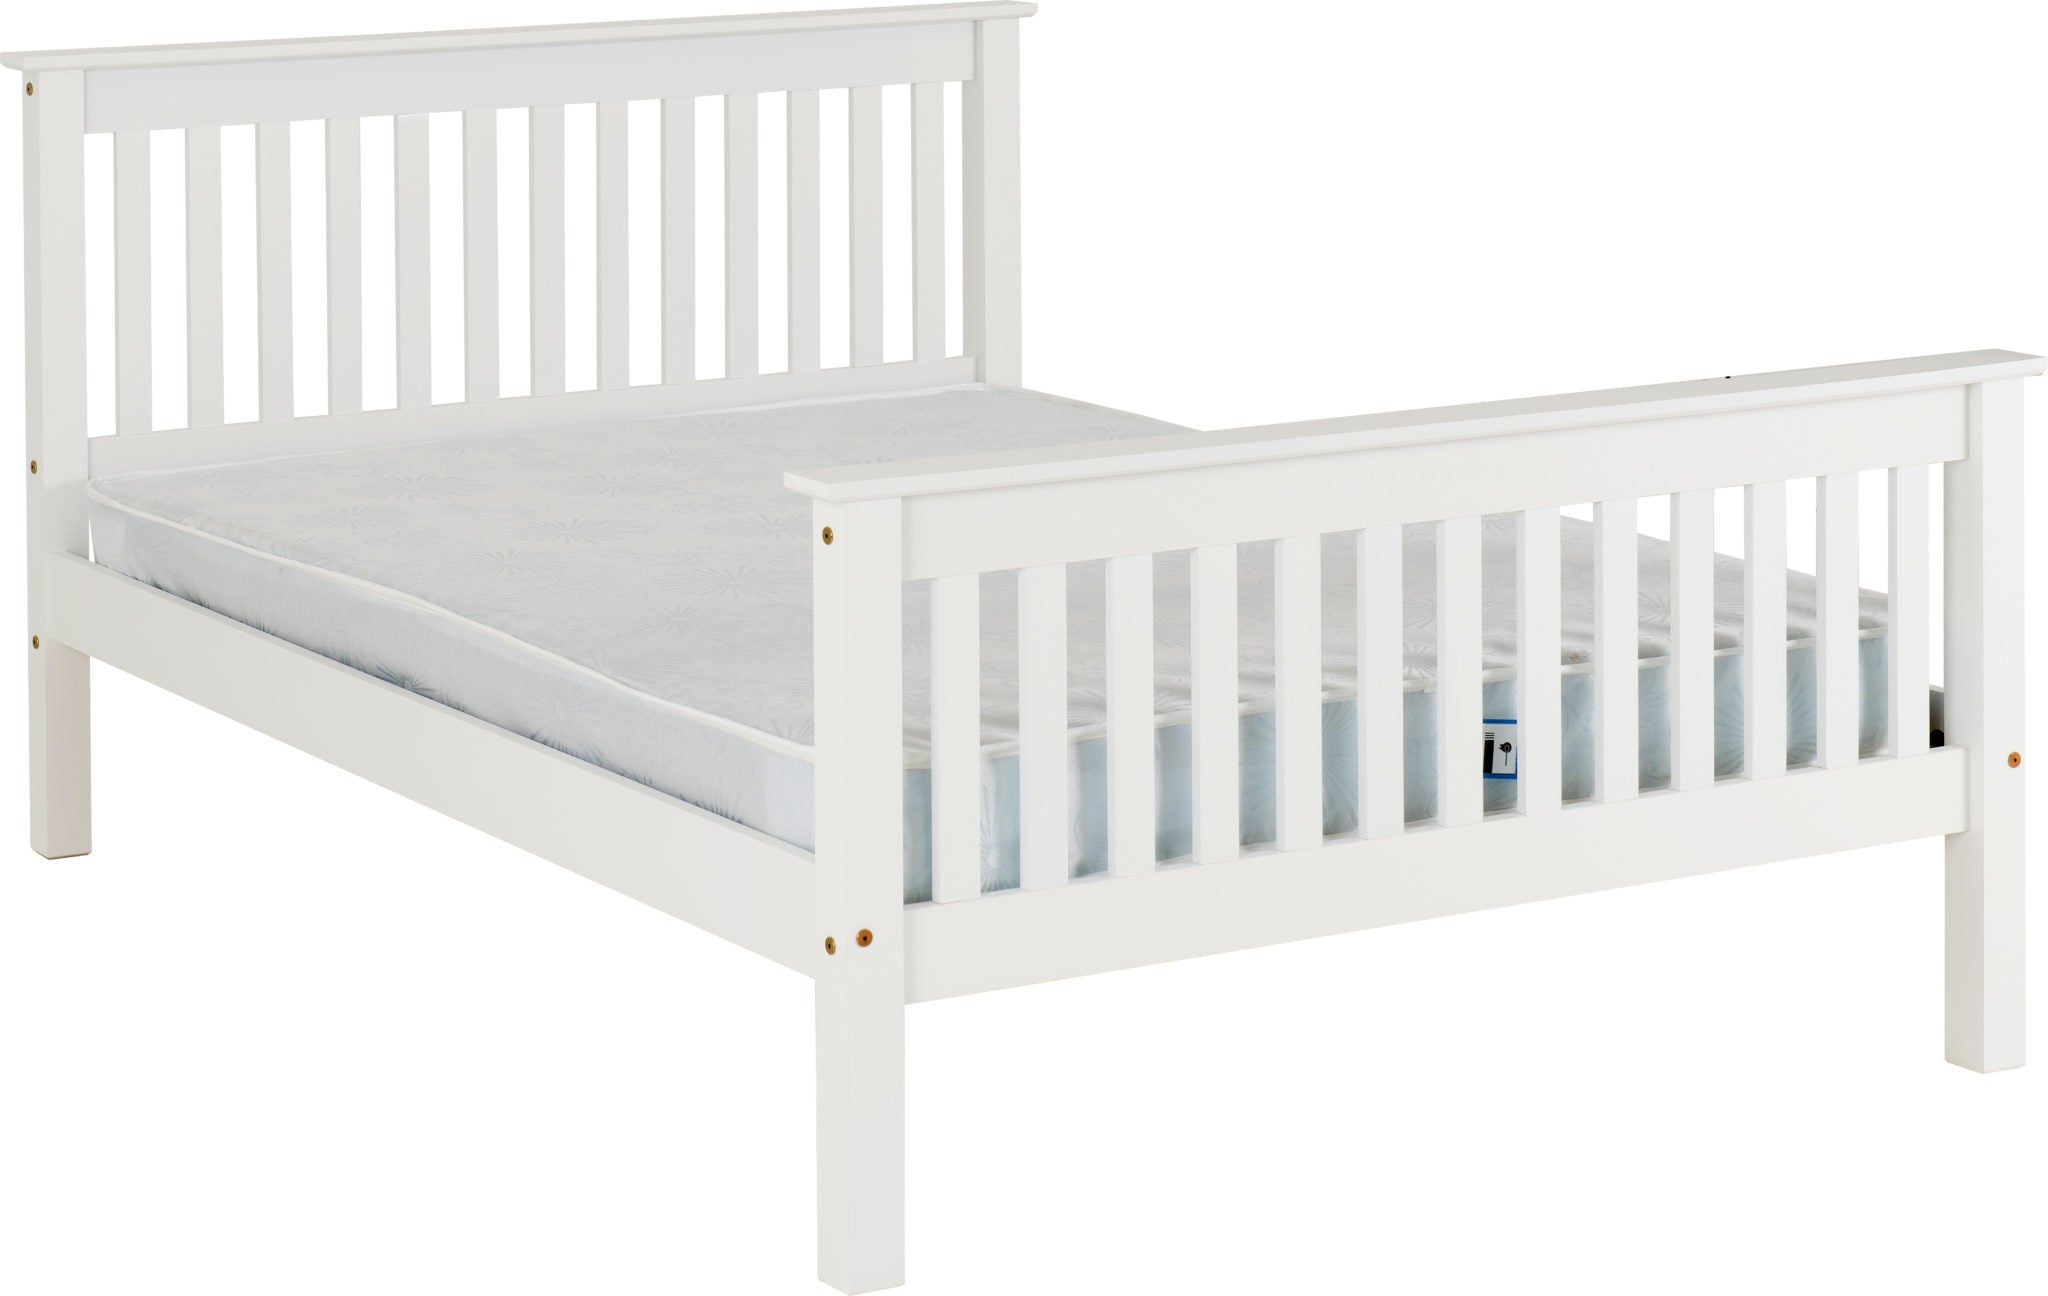 Monaco 4'6" Bed High Foot End White